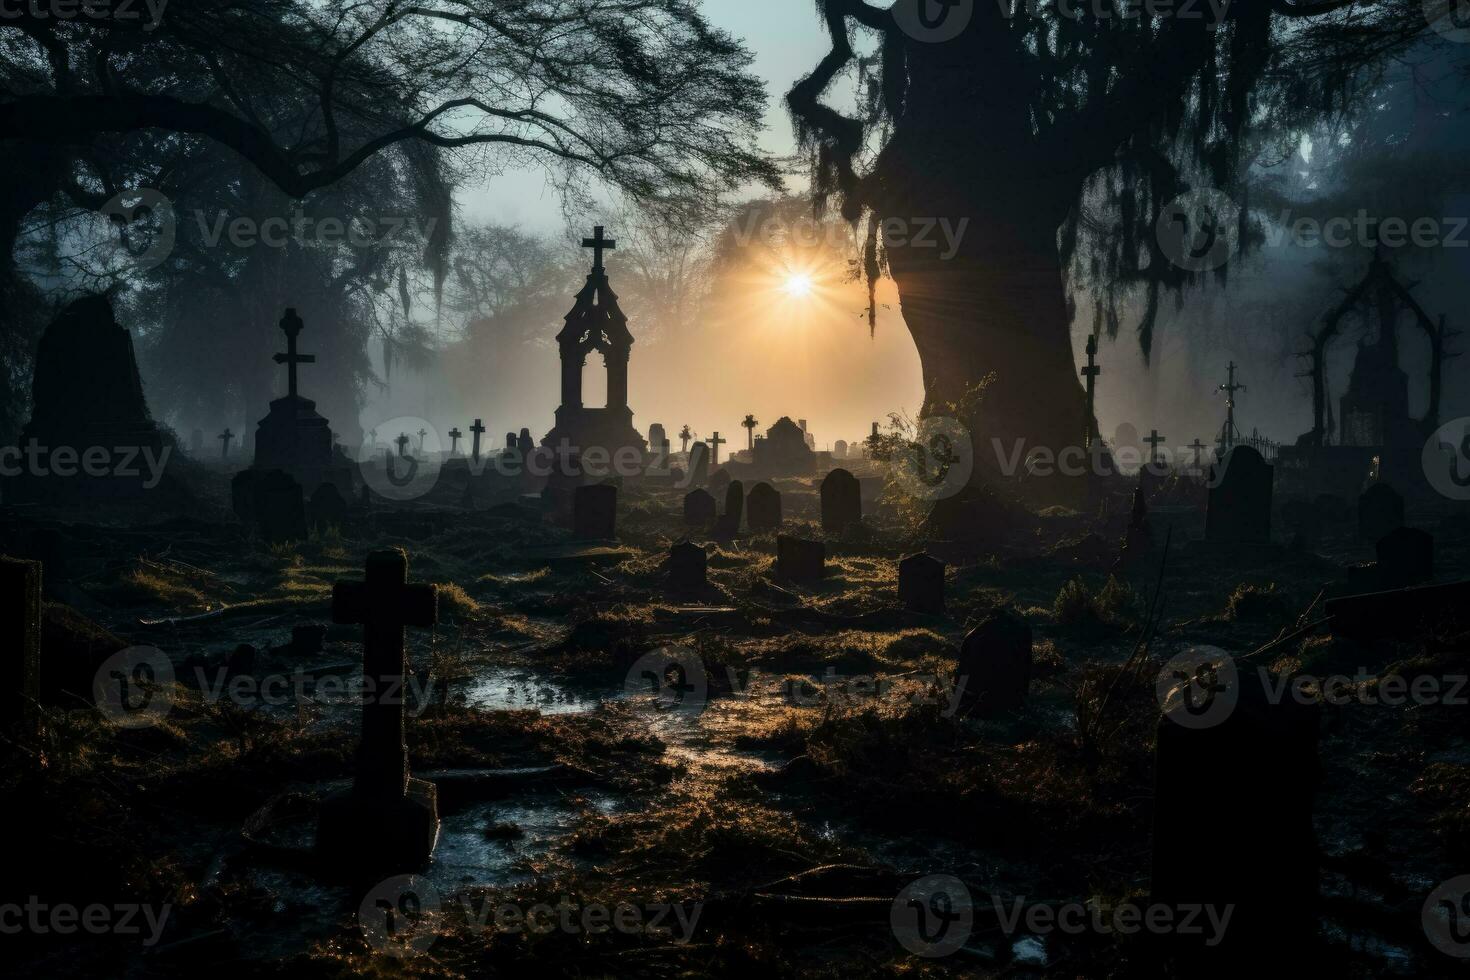 A haunting graveyard scene emerges from the mist as tombstones stand sentinel amidst the eerie gloom photo